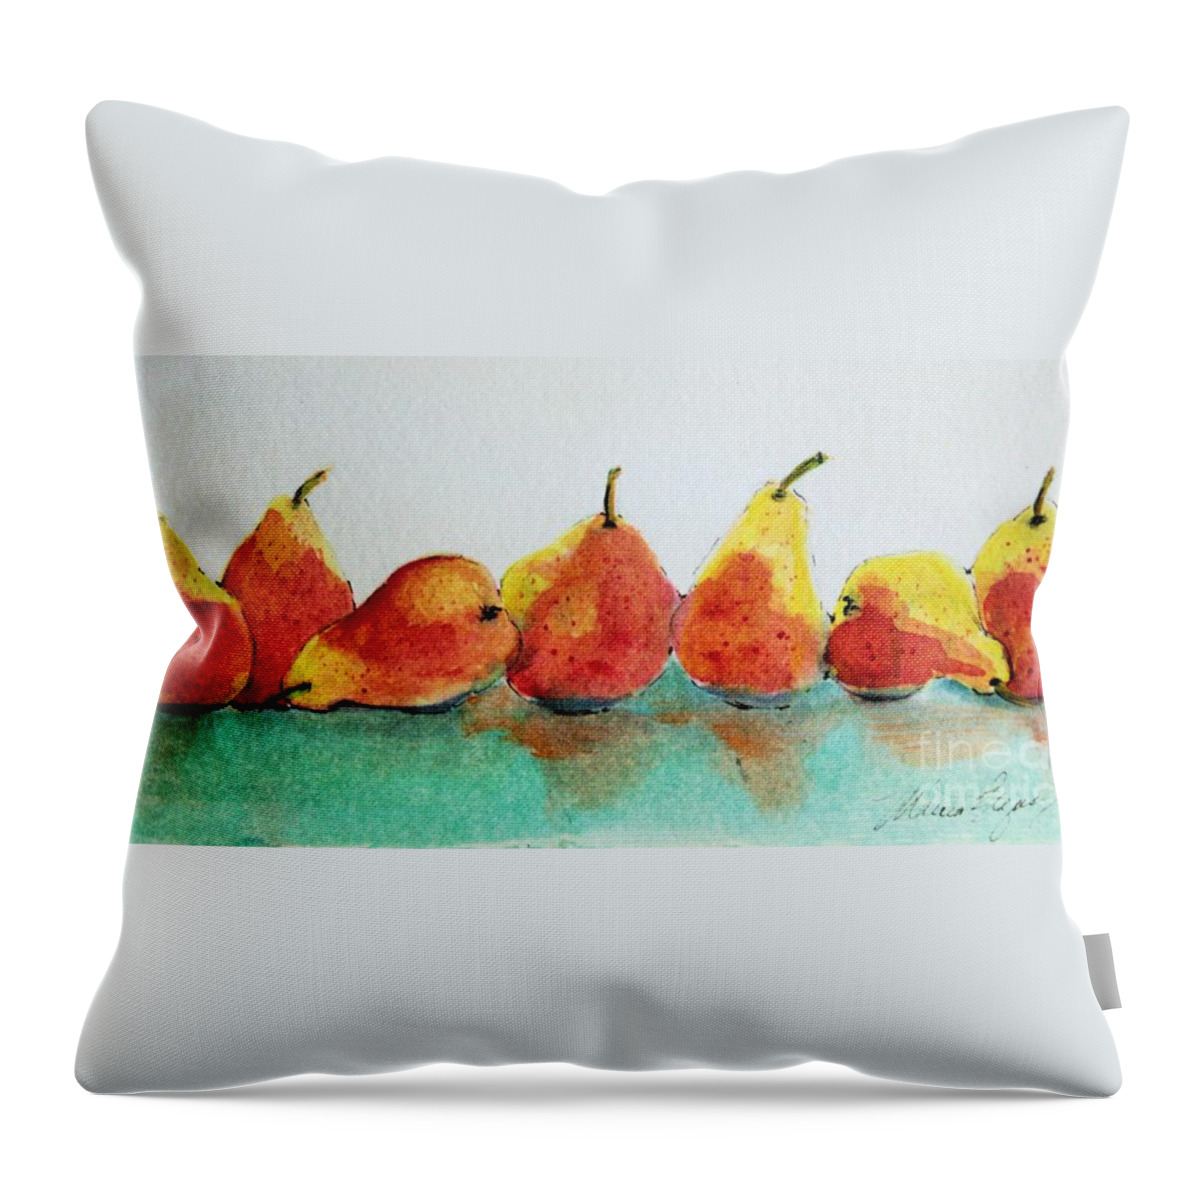 Pears Throw Pillow featuring the painting An Odd Pear by Marcia Breznay